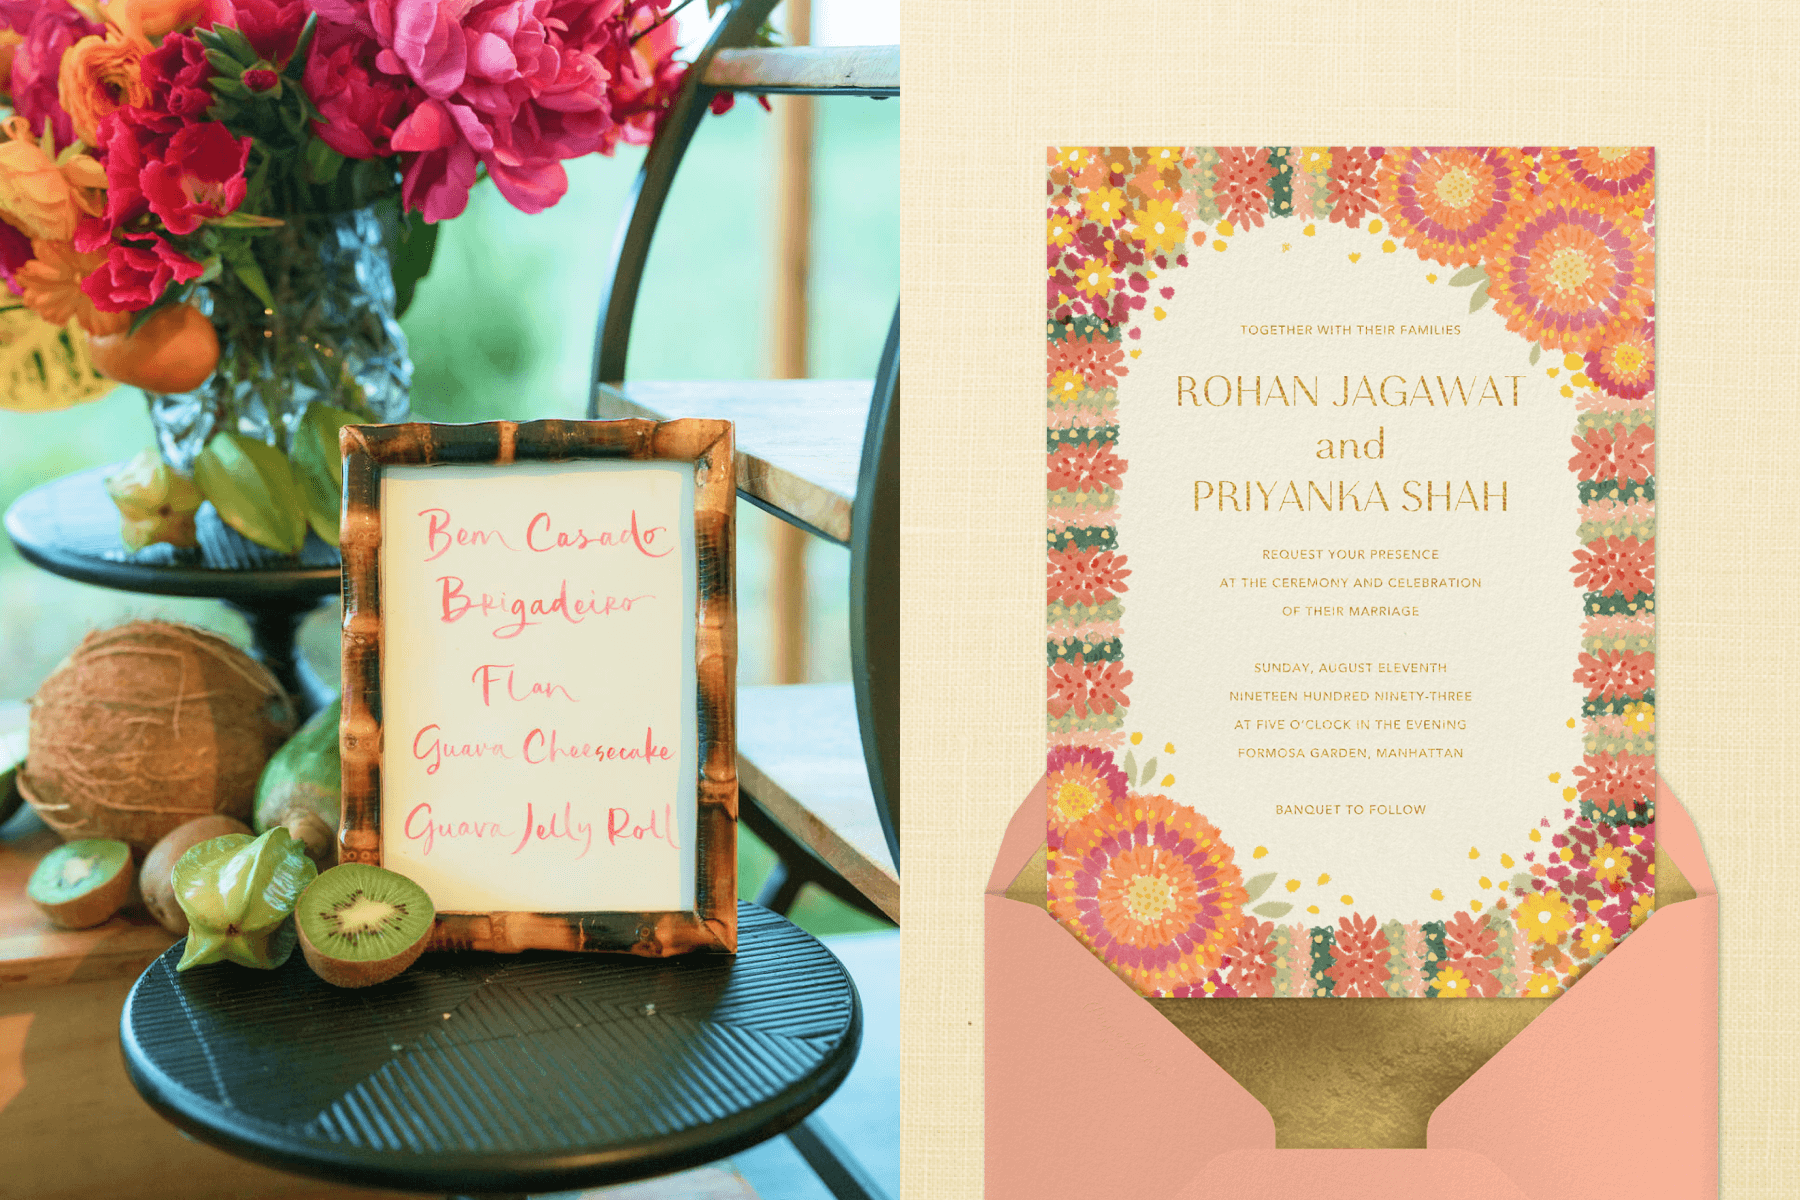 Left: A bamboo-framed sign with dessert names written in pink handwriting sits on a small black table beside kiwi fruit and flowers in the background. Right: A wedding invitation with a colorful border of sherbet-colored abstract flowers on a pink envelope with gold liner.